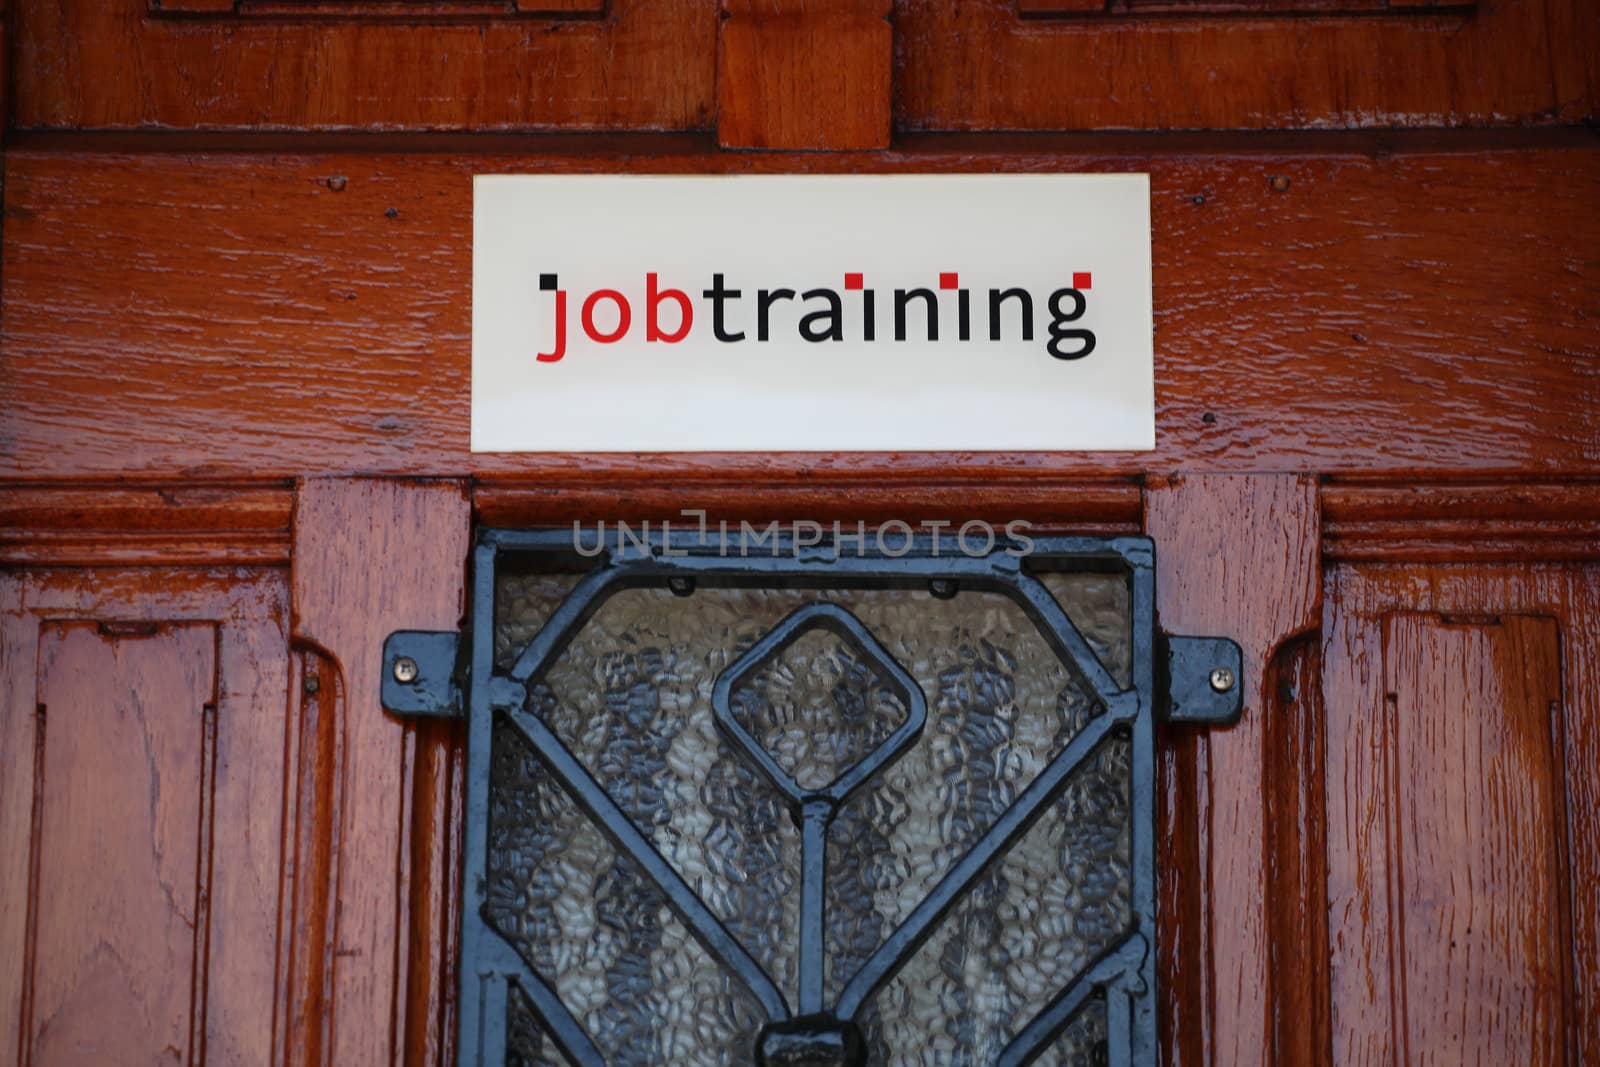 Job training for people who lost their job.